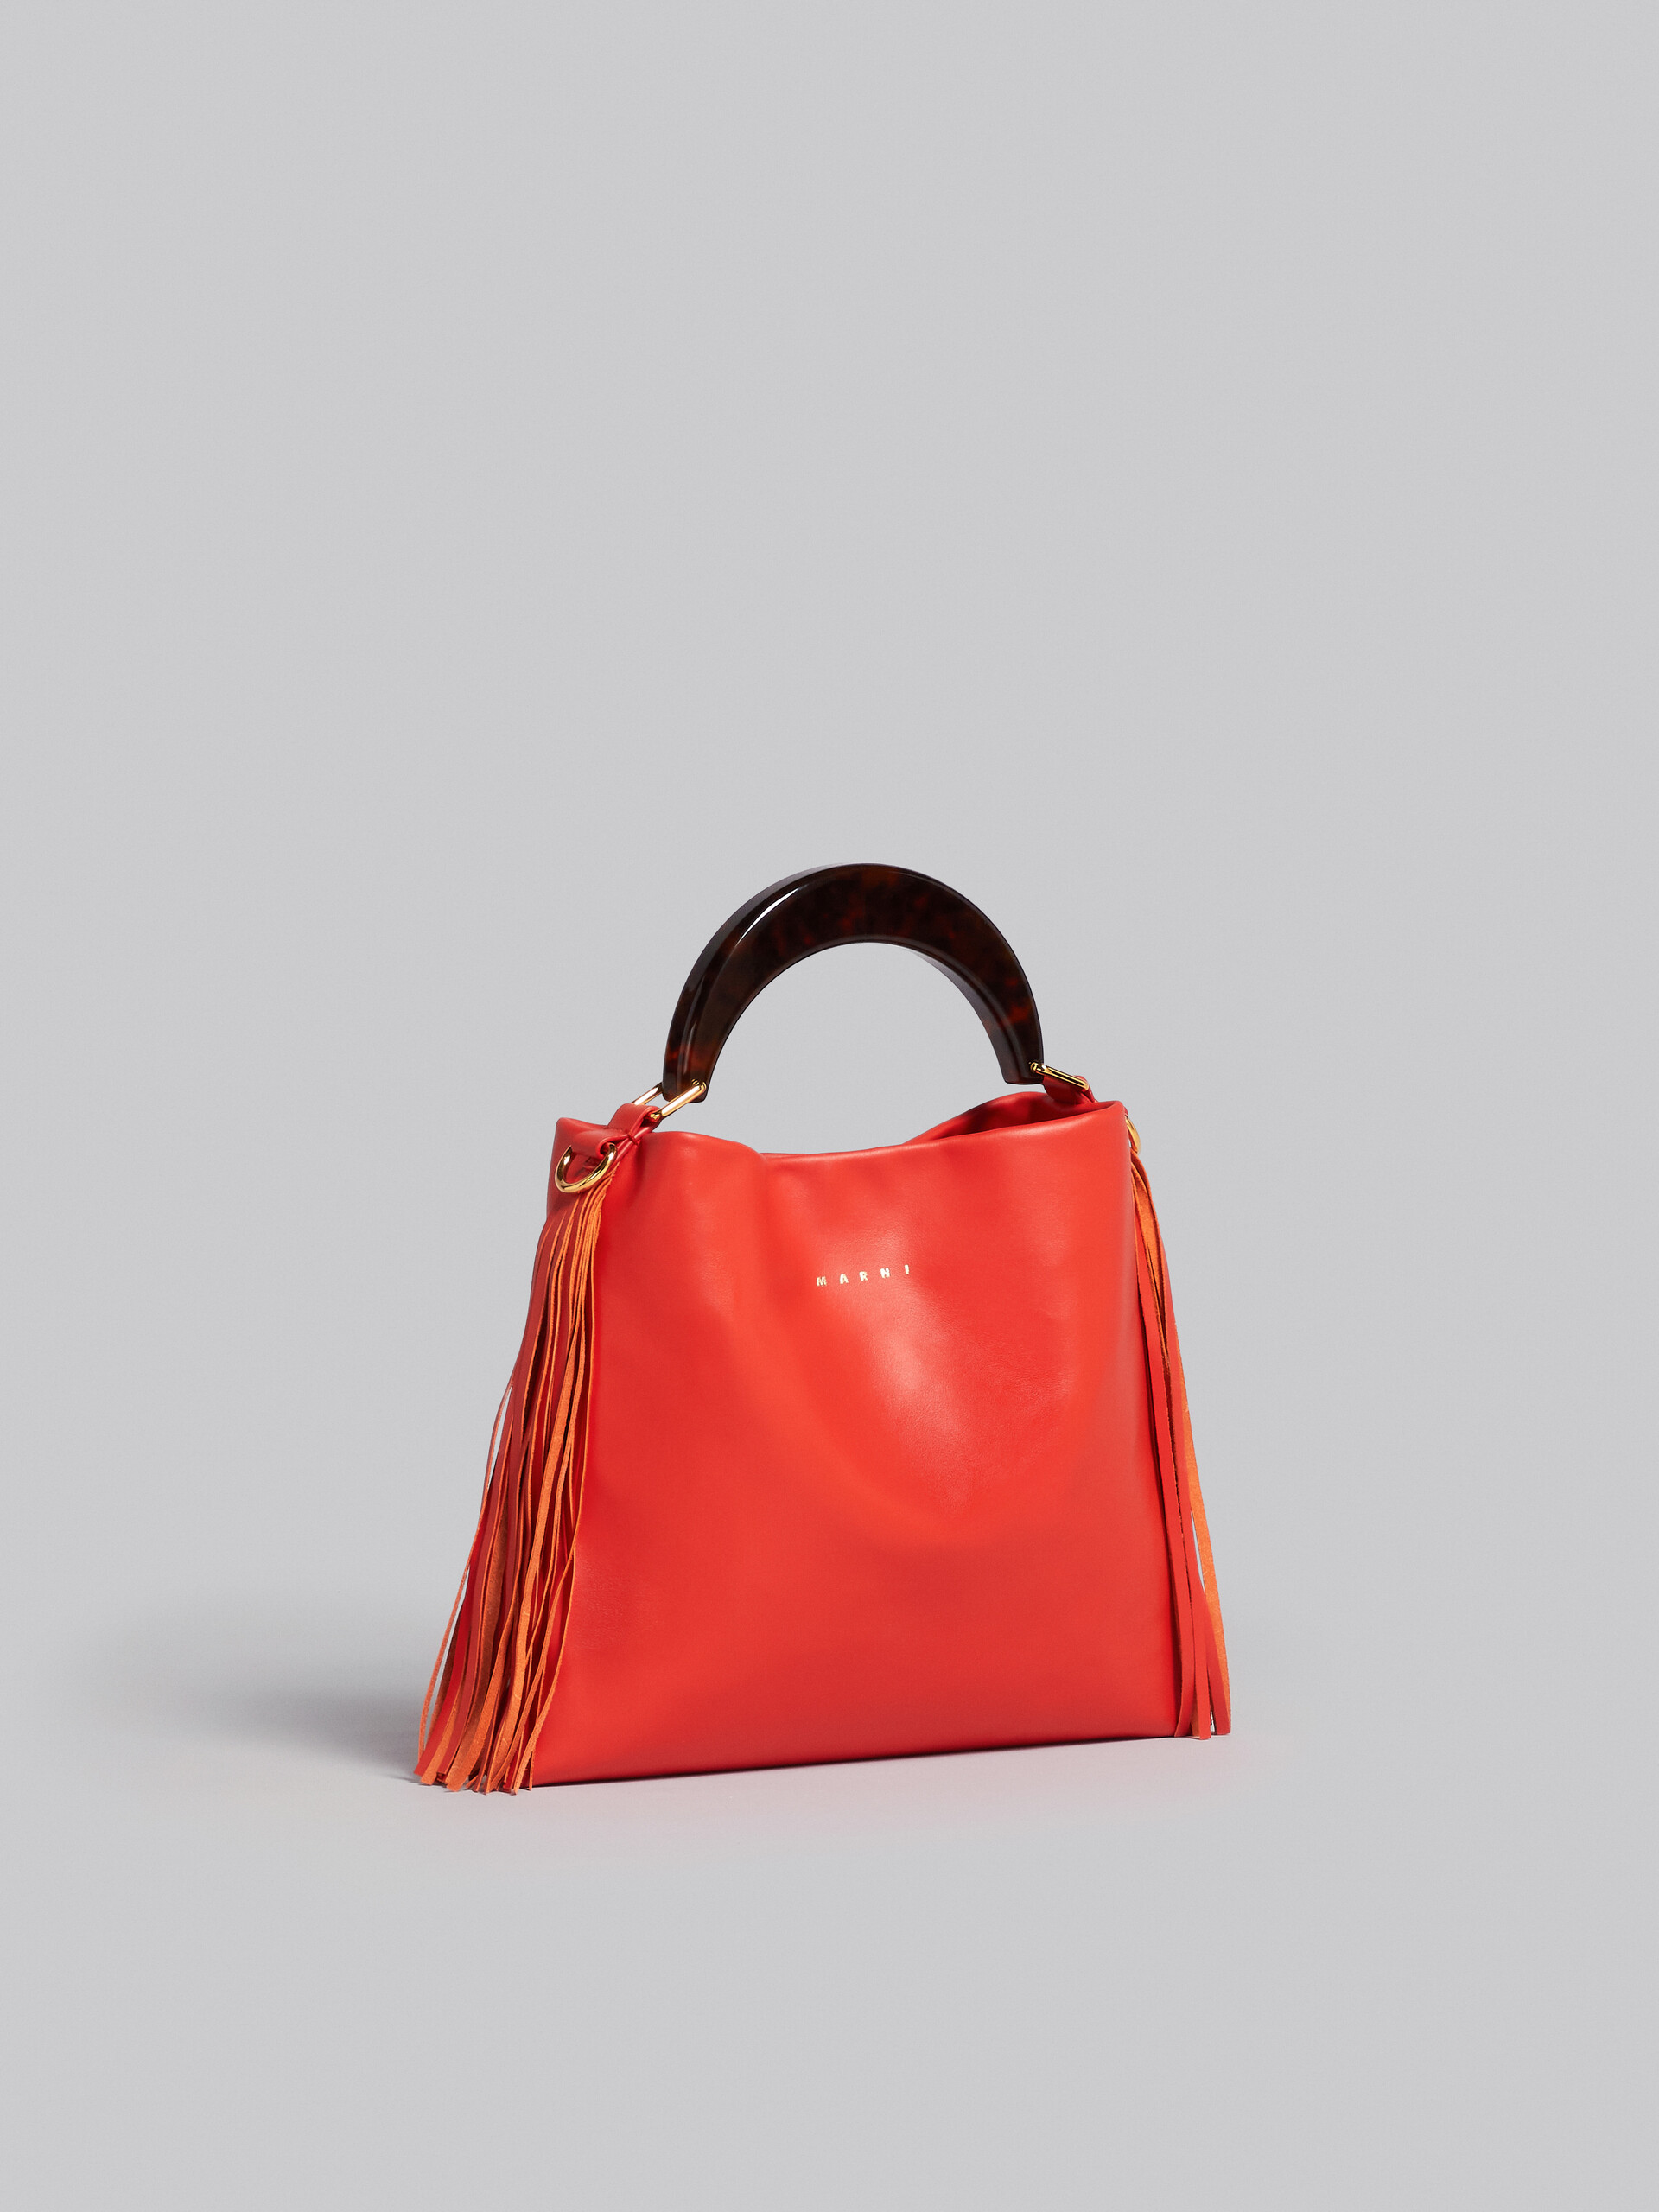 Venice Small Bag in orange leather with fringes - Shoulder Bags - Image 6